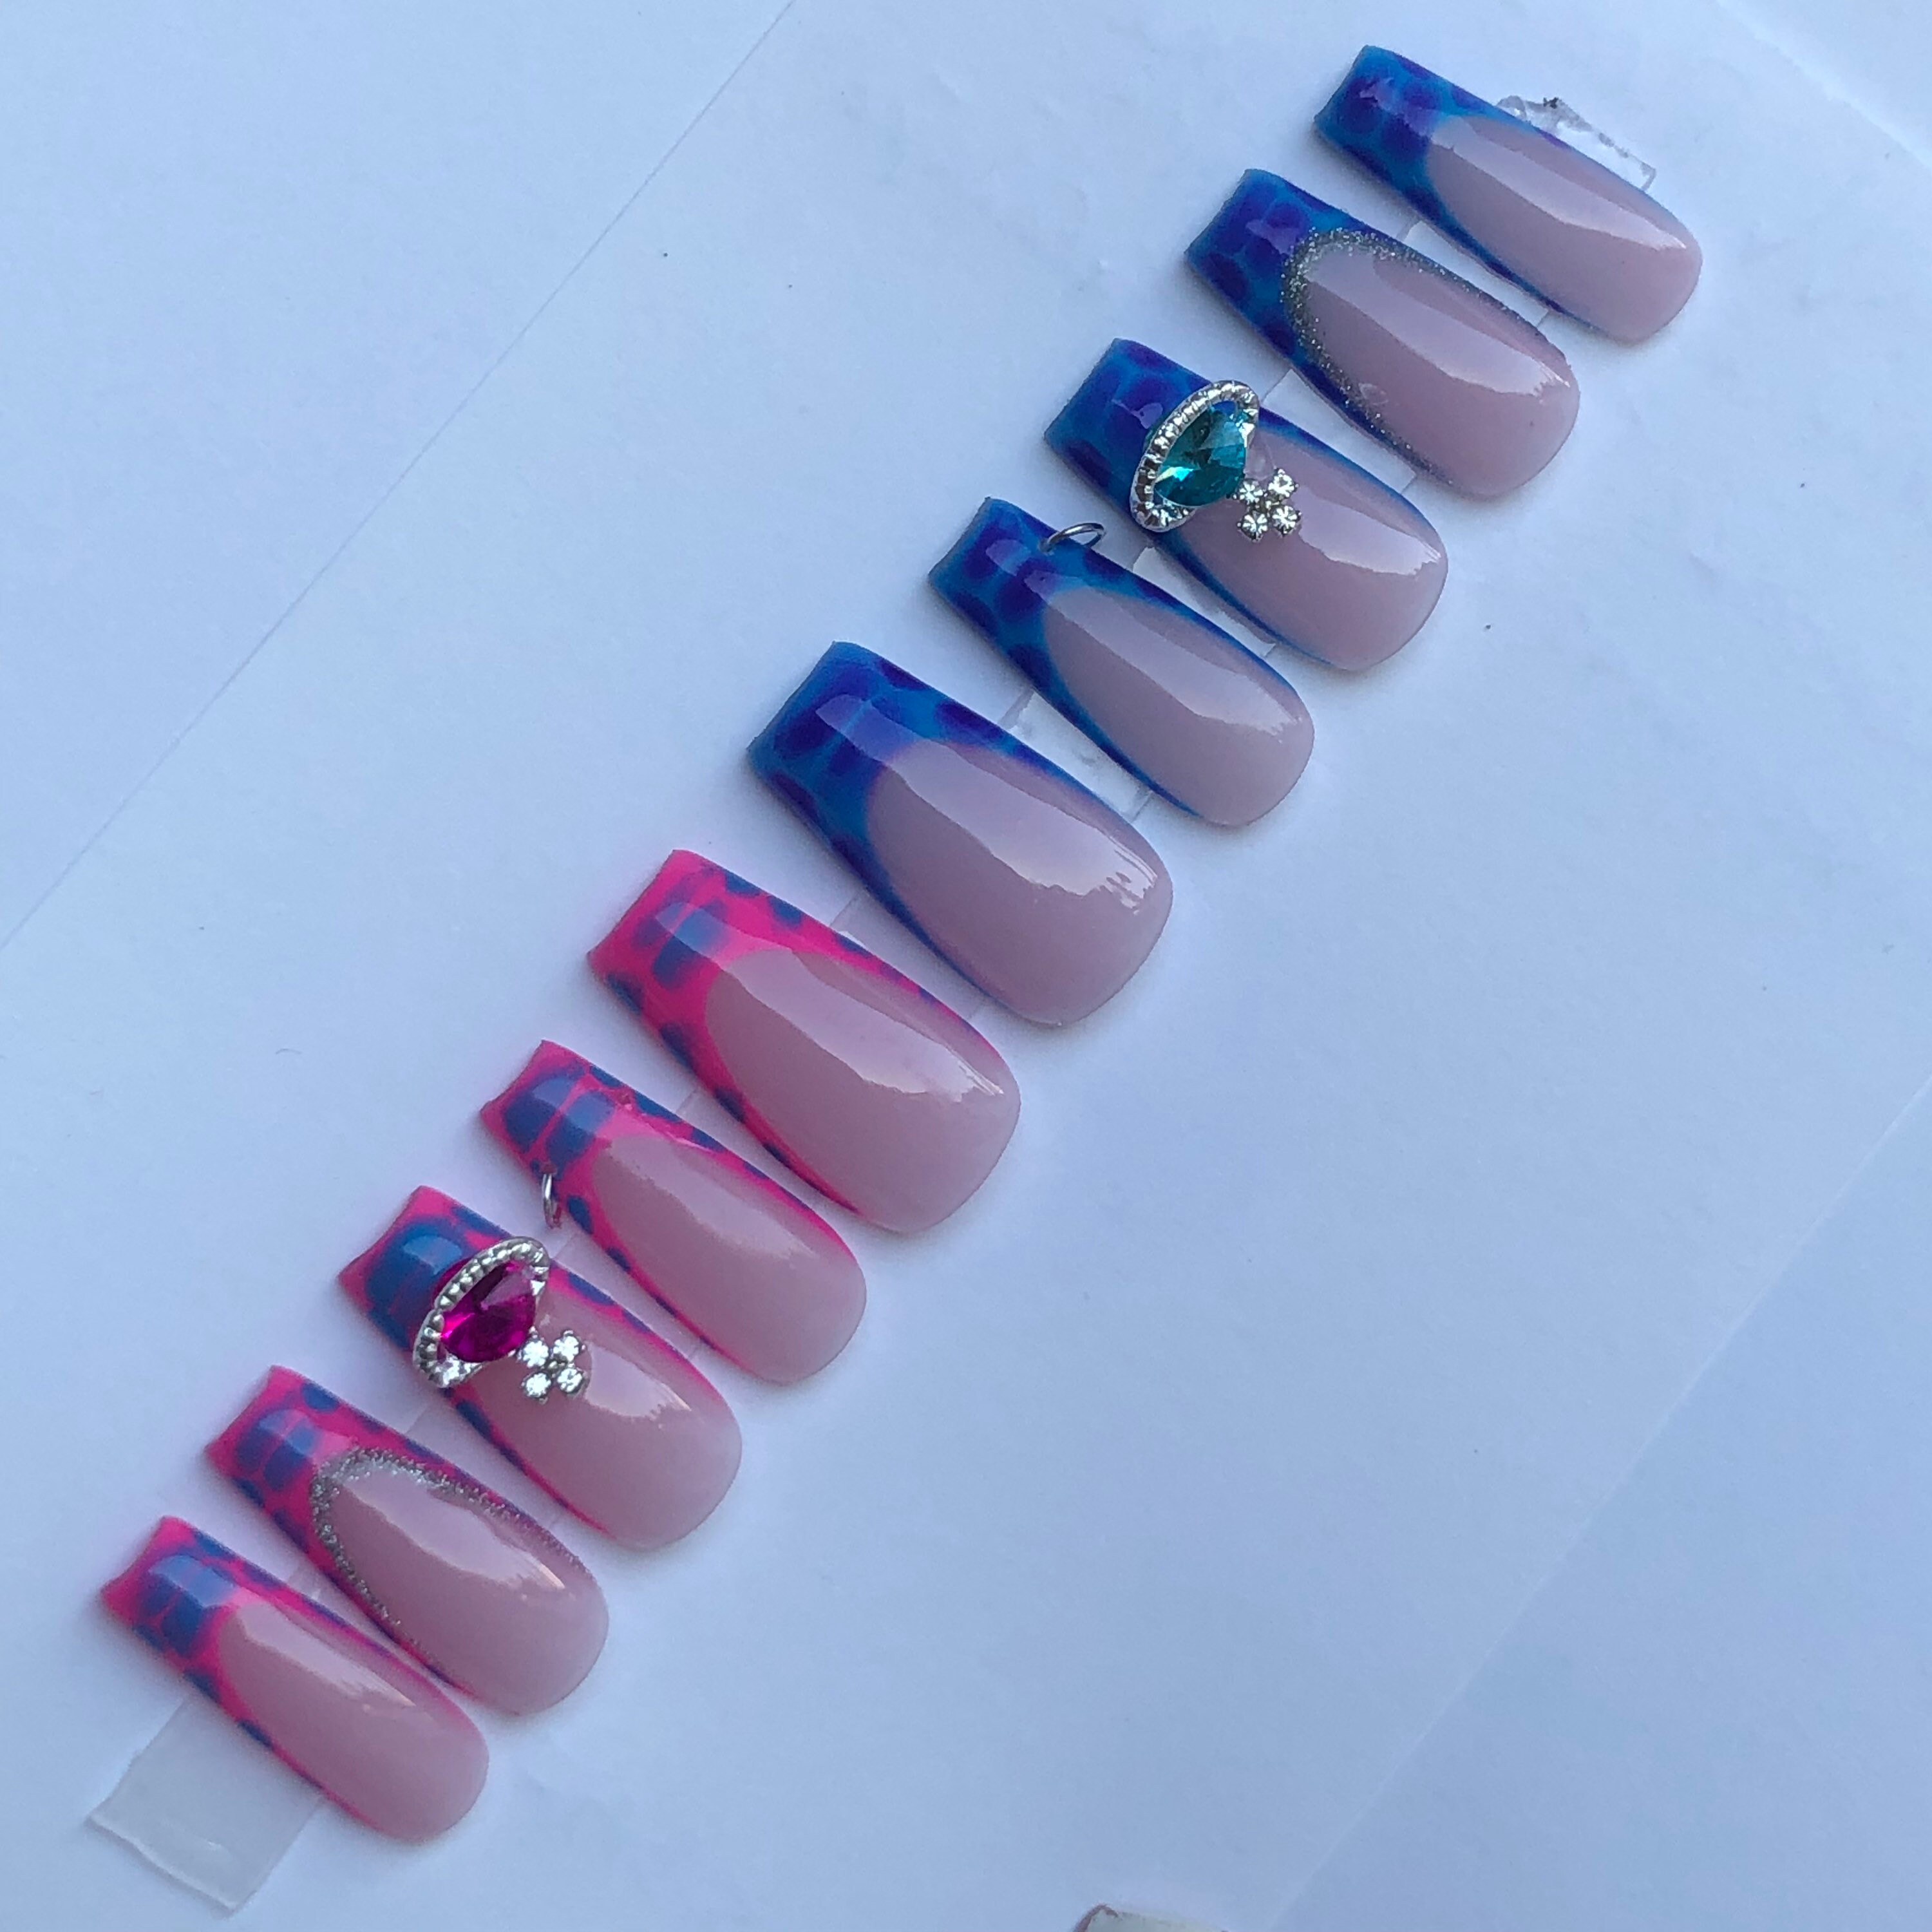 3D Blue Croc French Tip Press on Nails Charms Press on Nails Long Nails  French Tip Nails Croc Nails Luxury Nails Bling Nailstie Dye 